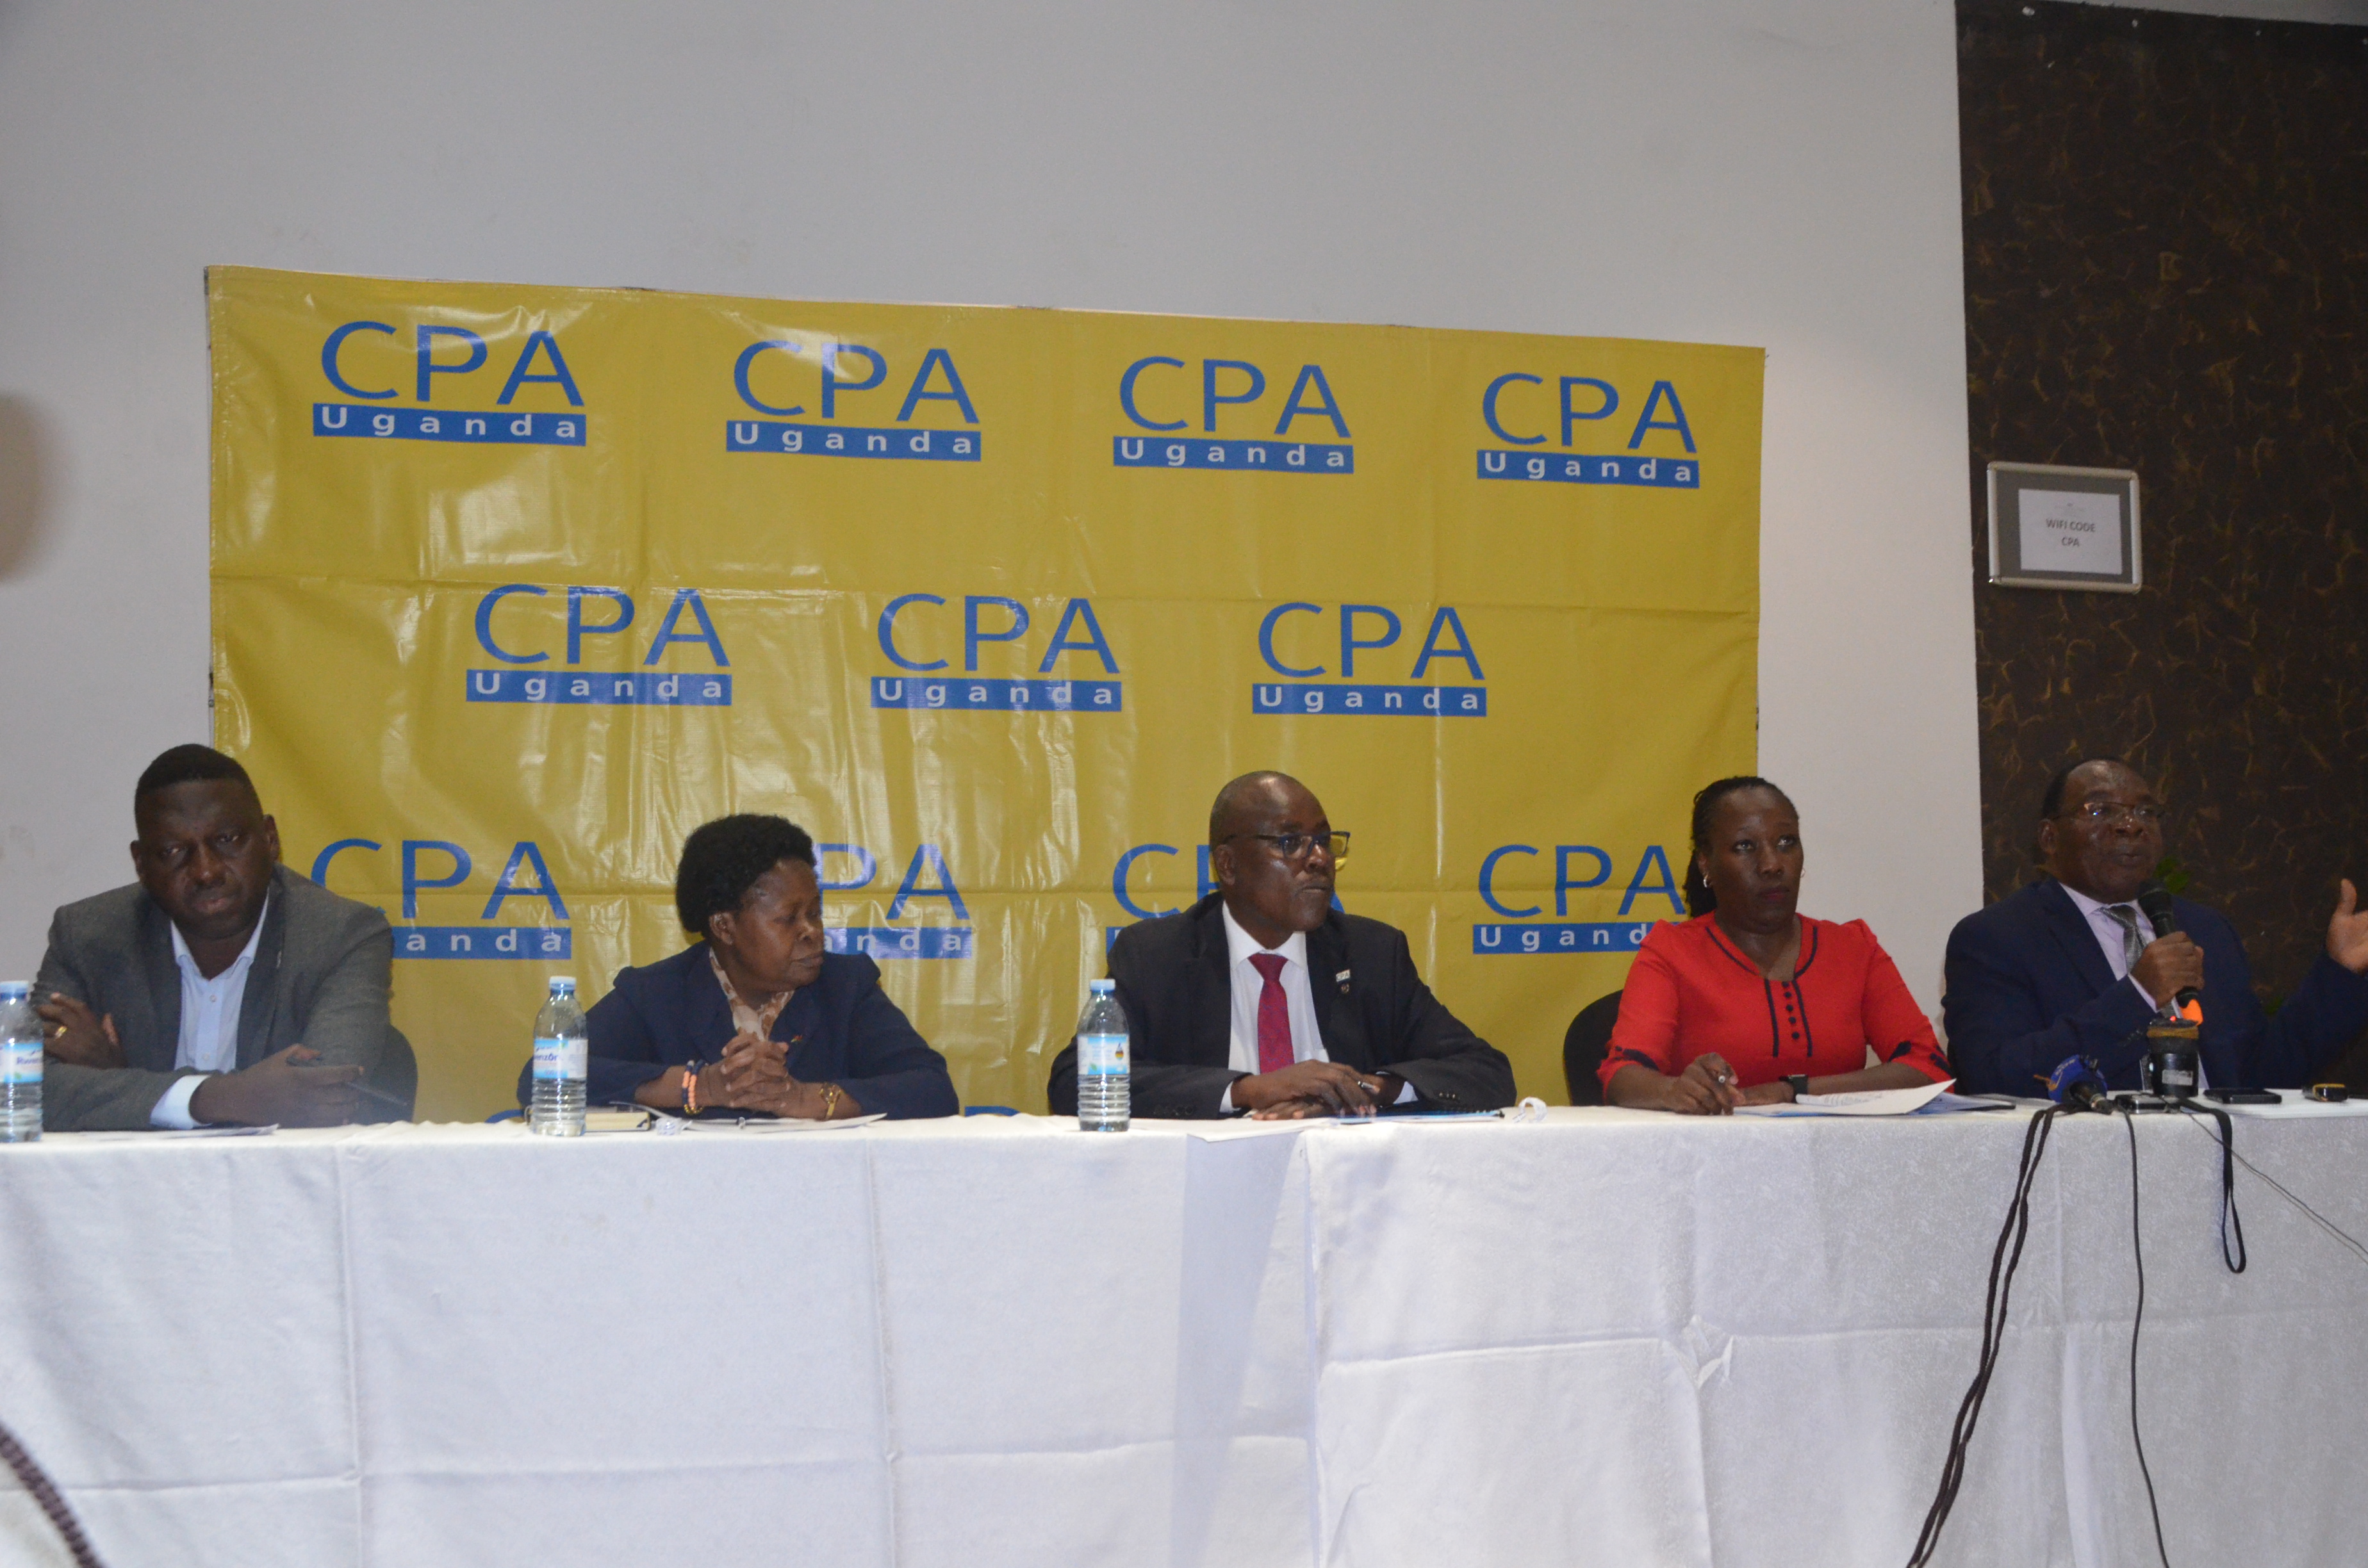 CPA Timothy Ediomu, Council member, ICPAU (L) , CPA Ronald Mutumba, Vice President of ICPAU (C),CPA Pro Laura Orobia, Chairperson PAEB (2nd R) and Mr. John Bosco Ntangaare, Director of Education, ICPAU (R) at the release of November Examinations diet 2023.